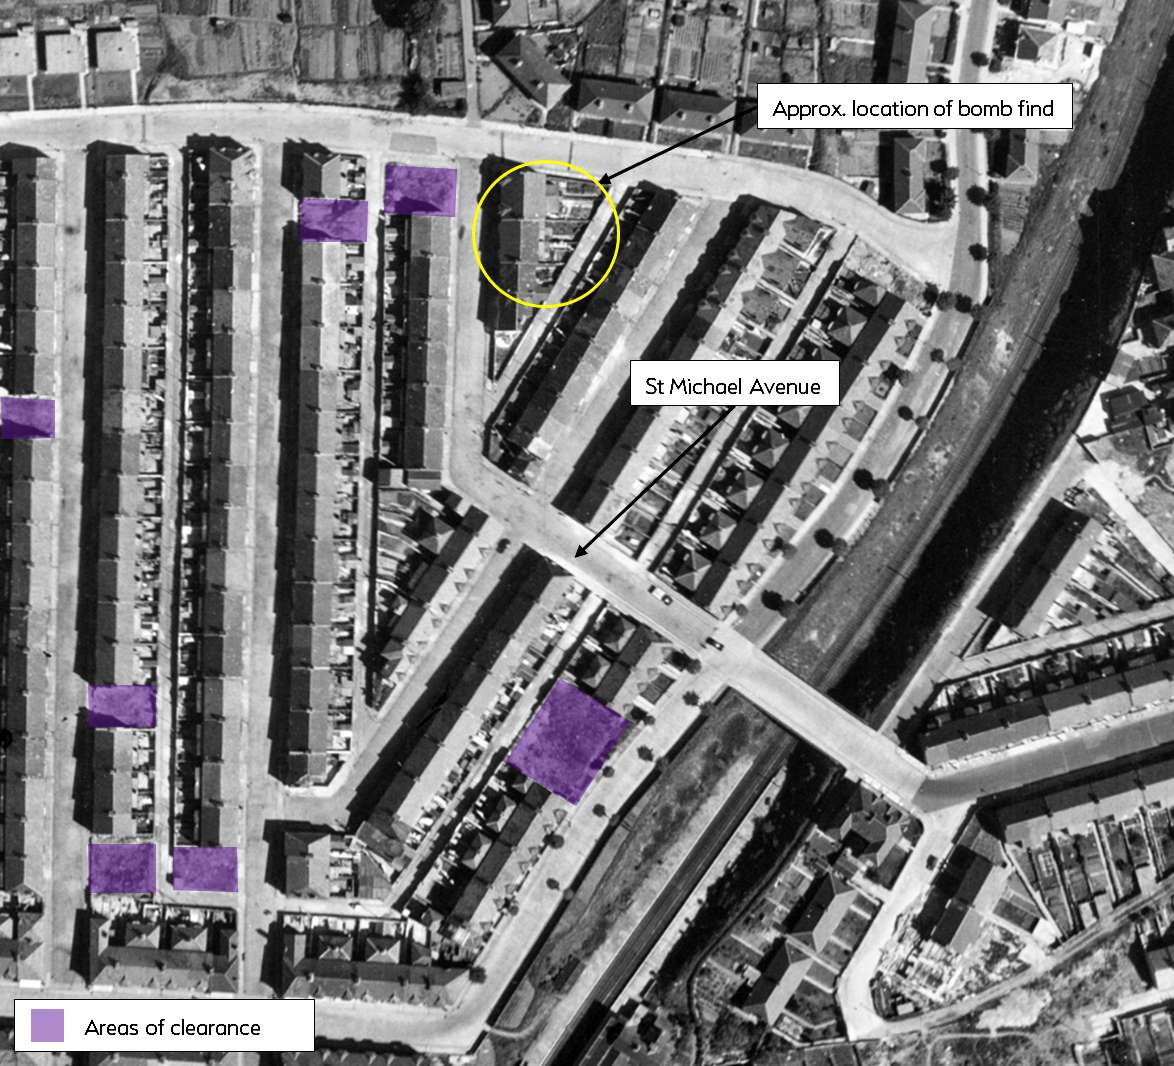 RAF Aerial Photography from 1947 of clearance areas resulting from bombing on and around St Michael Avenue in Keyham, Plymouth. (Image credit: Historic England)